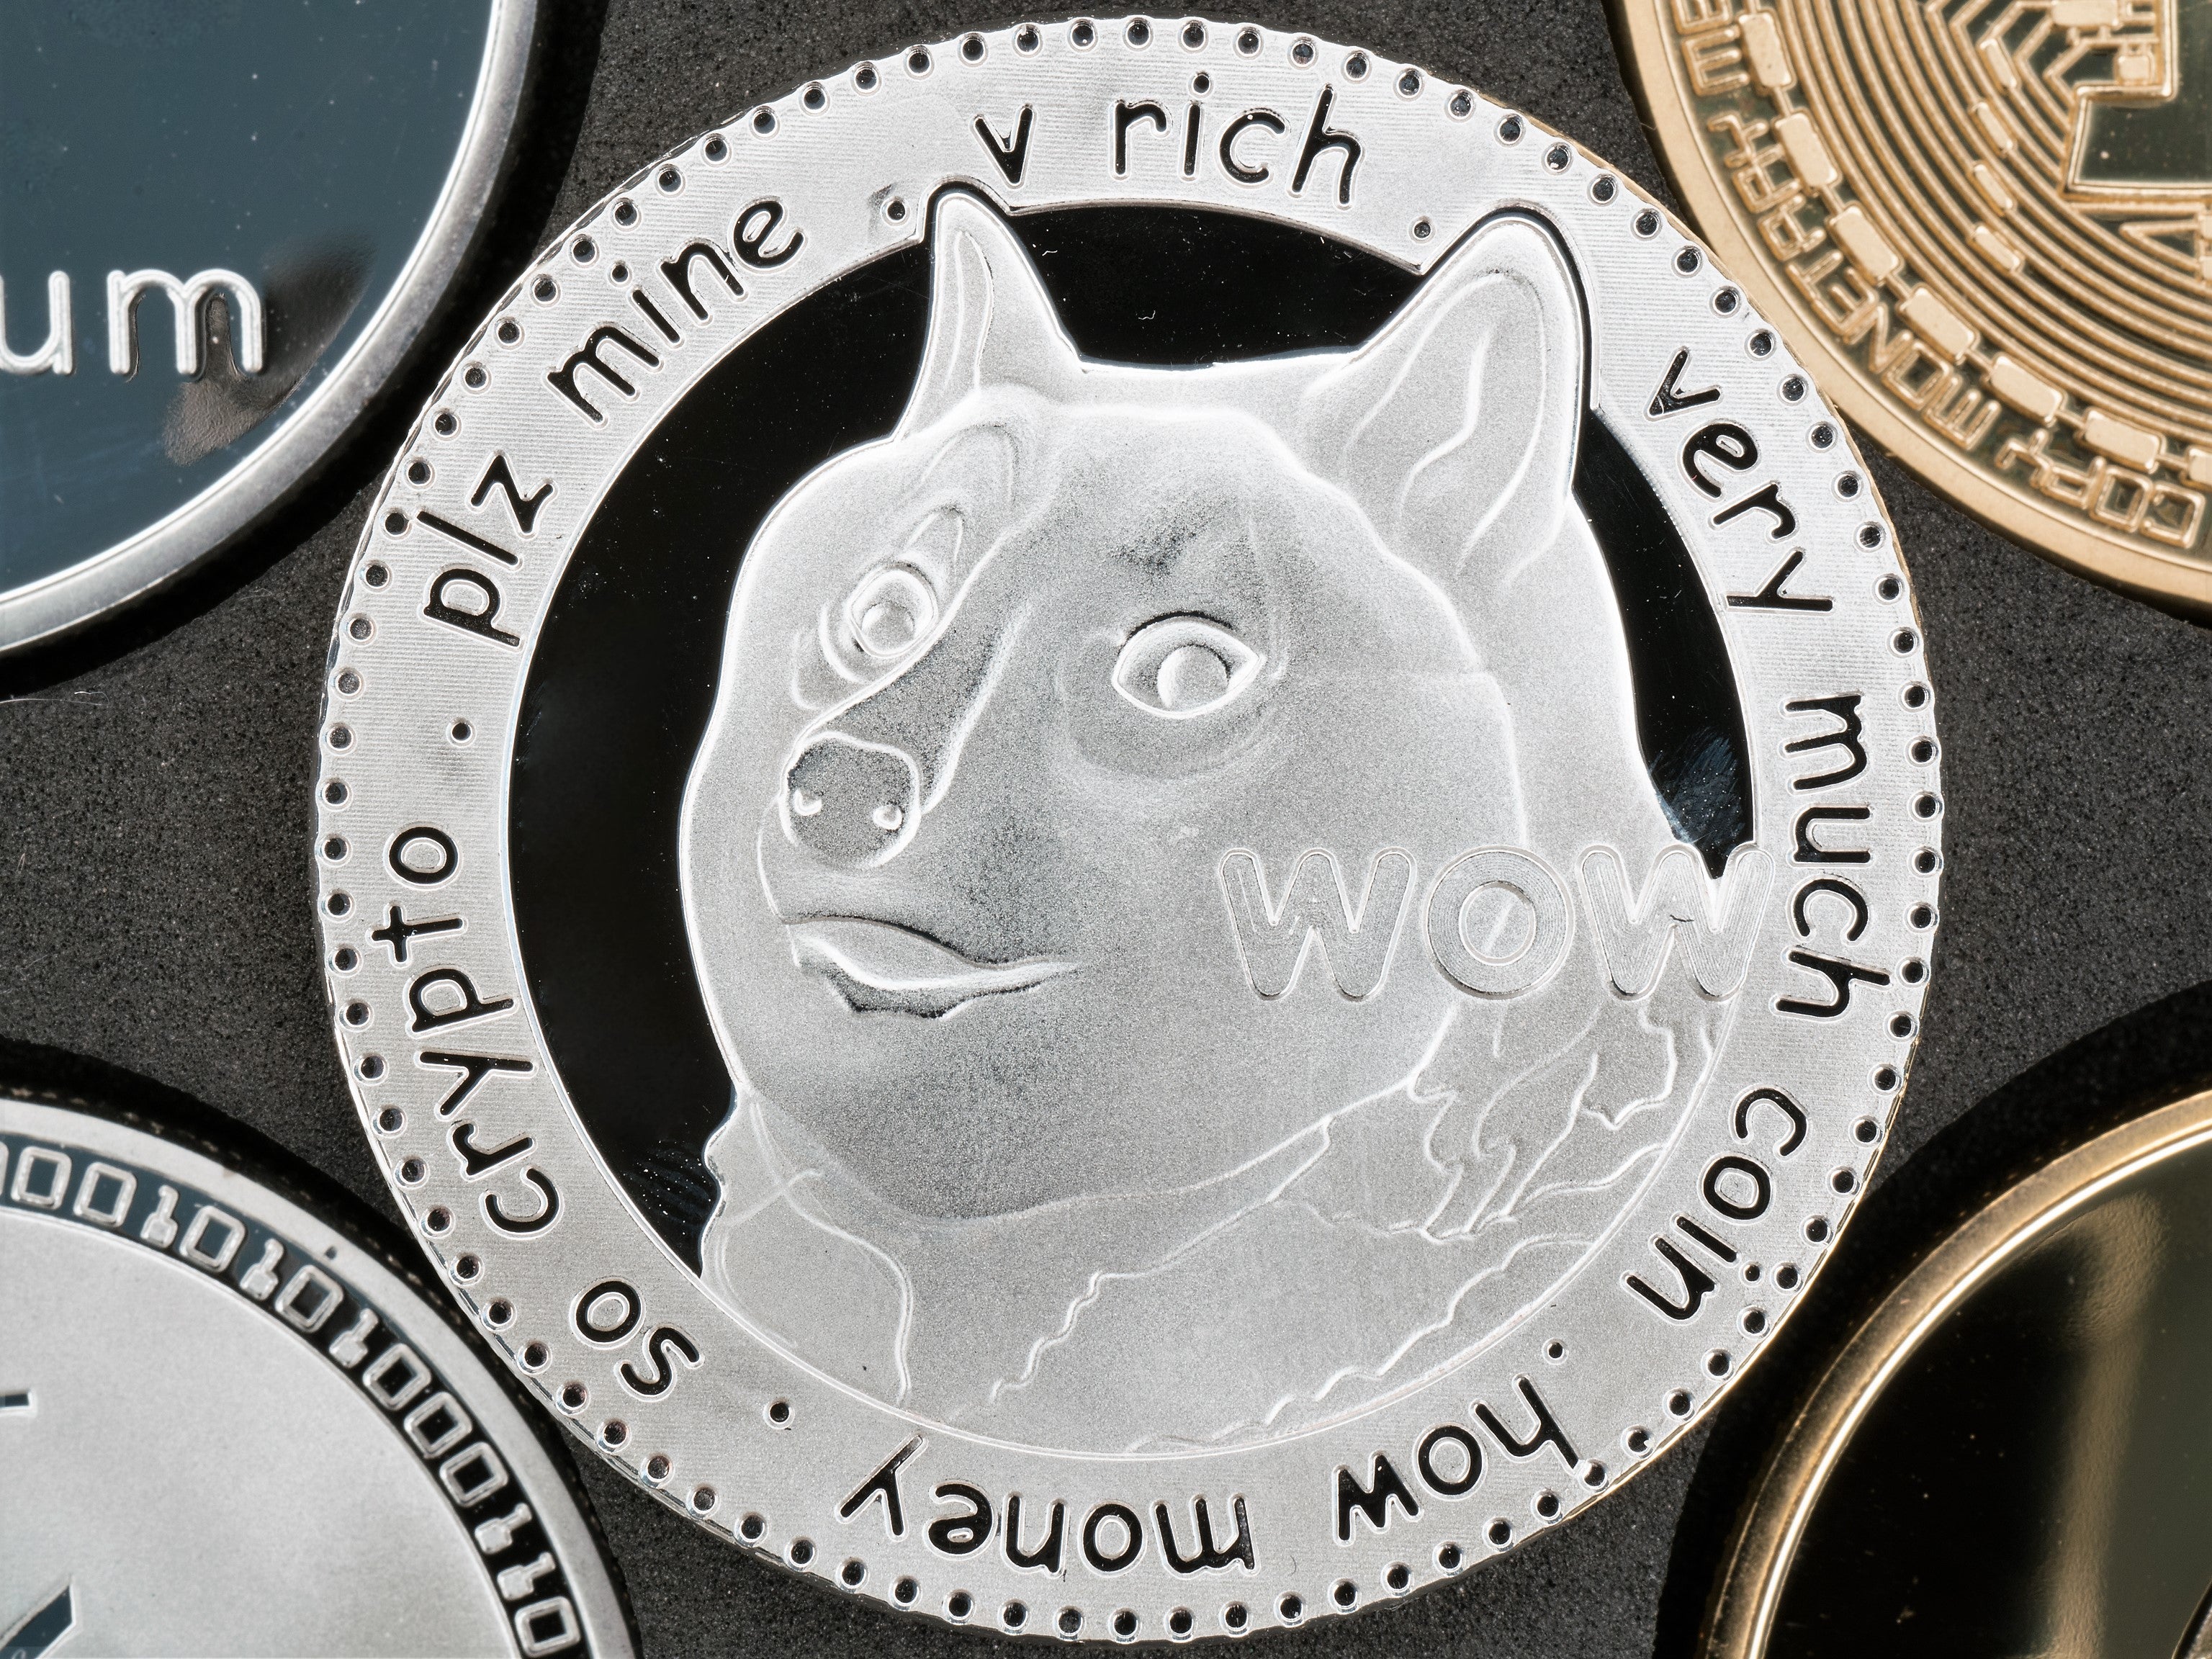 Dogecoin has risen in price by more than 50,000 per cent since 2014